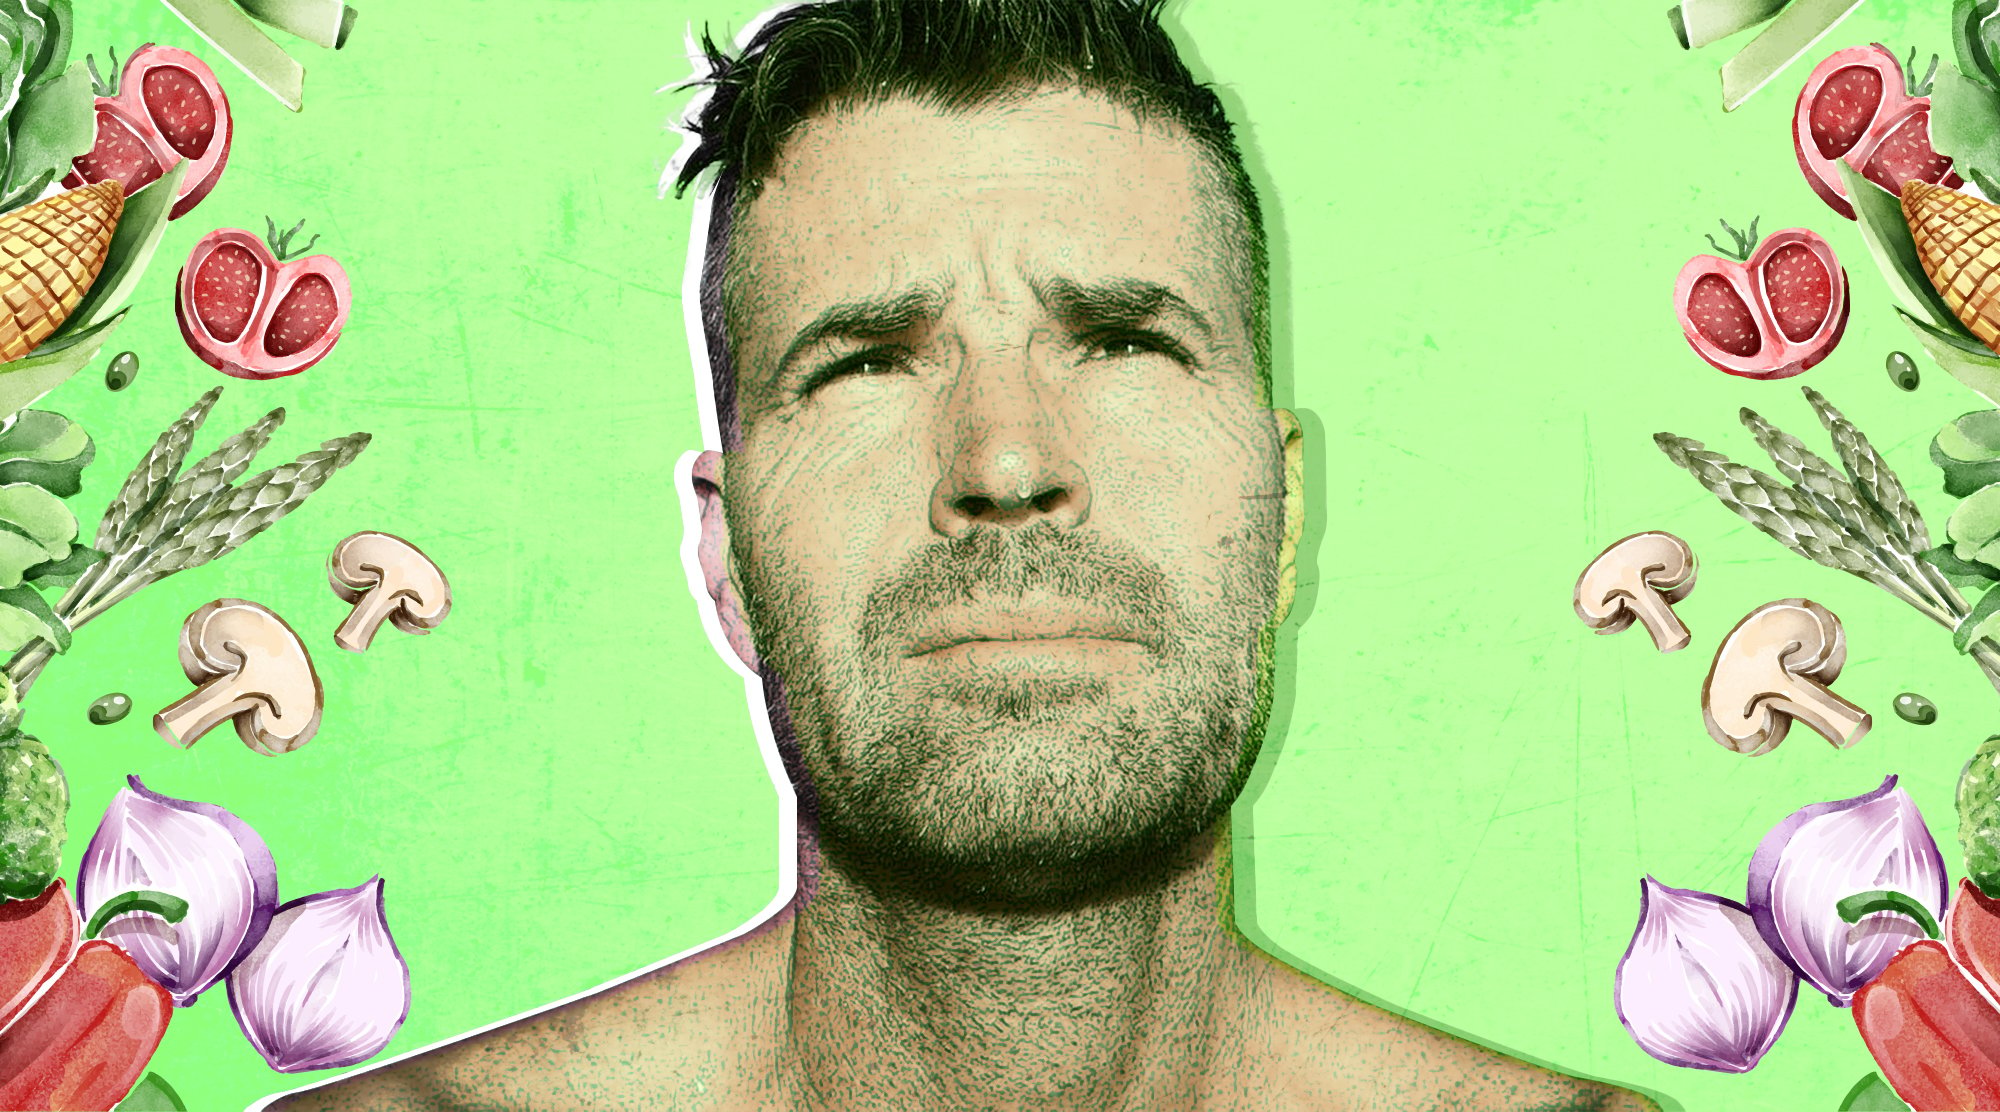 Down the Rabbit Food Hole: Pete Evans and the Danger of "Wellness"